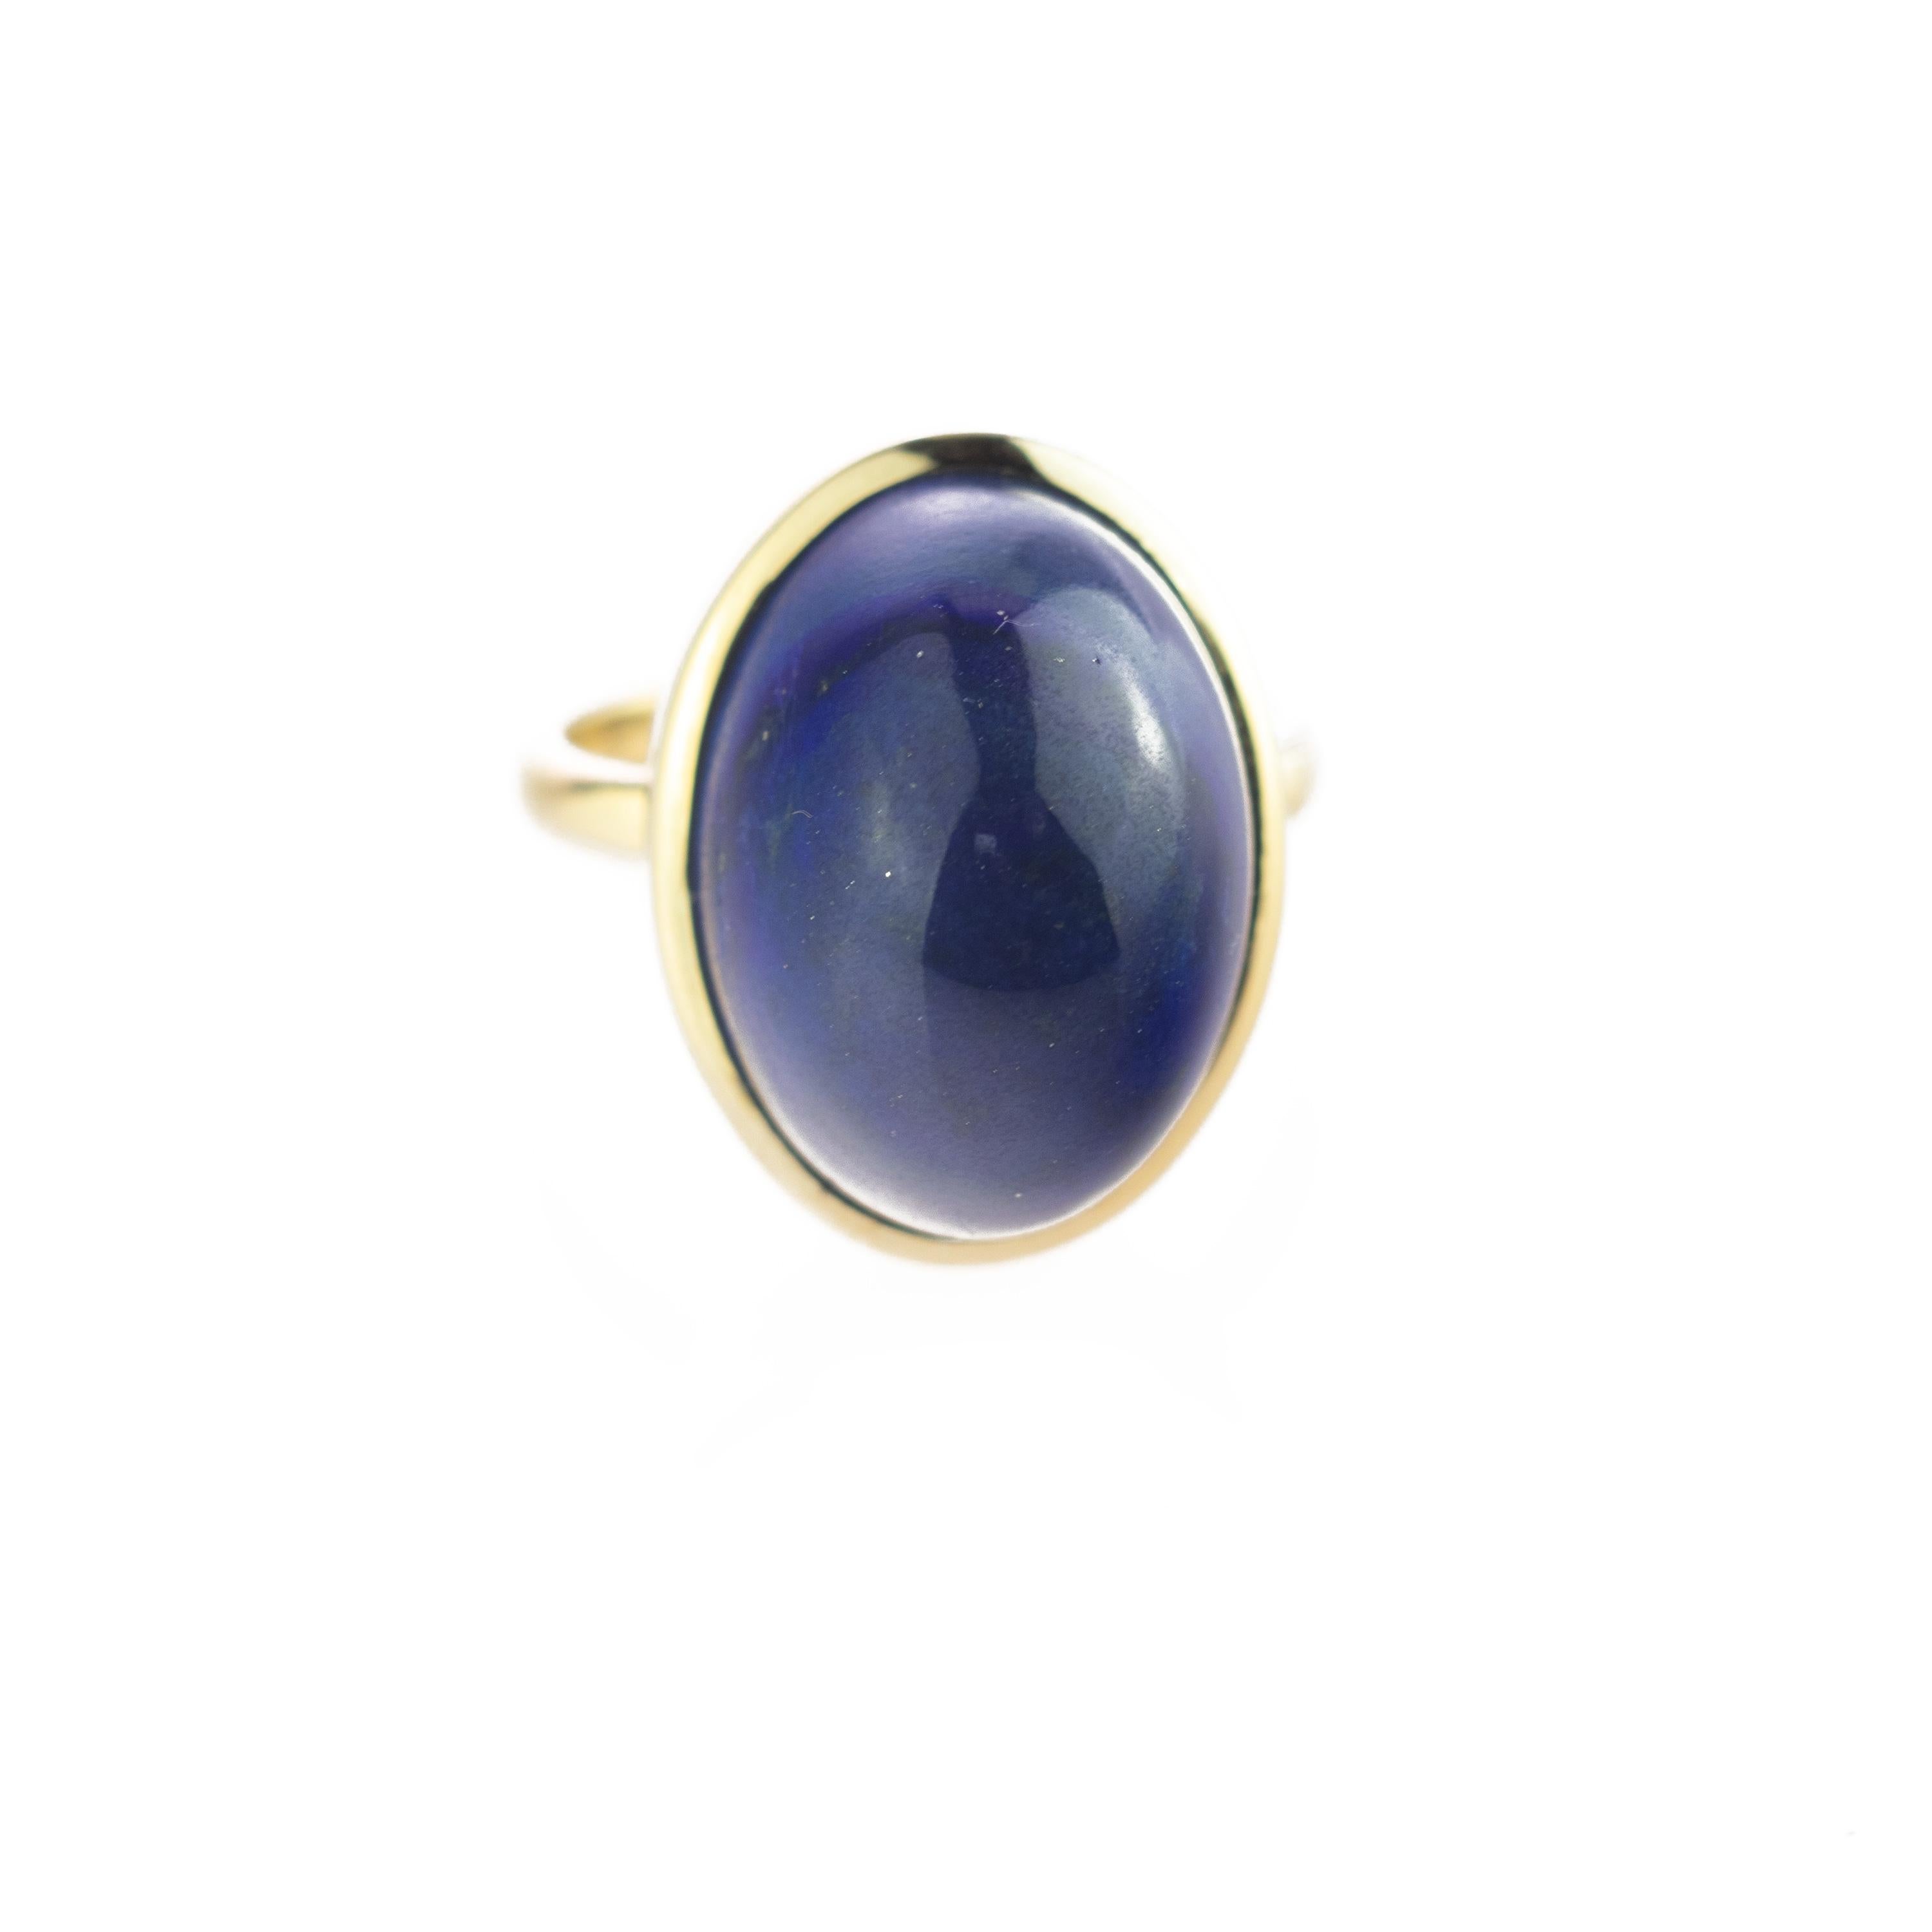 This minimalist design enhances a matte precious natural 26.5 carats Lapis Lazuli cabochon. The 18 karat gold ring highlights the blue color, surrounding into a glamorous and eccentric gold touch.

The Sumerians believed that the spirit of their